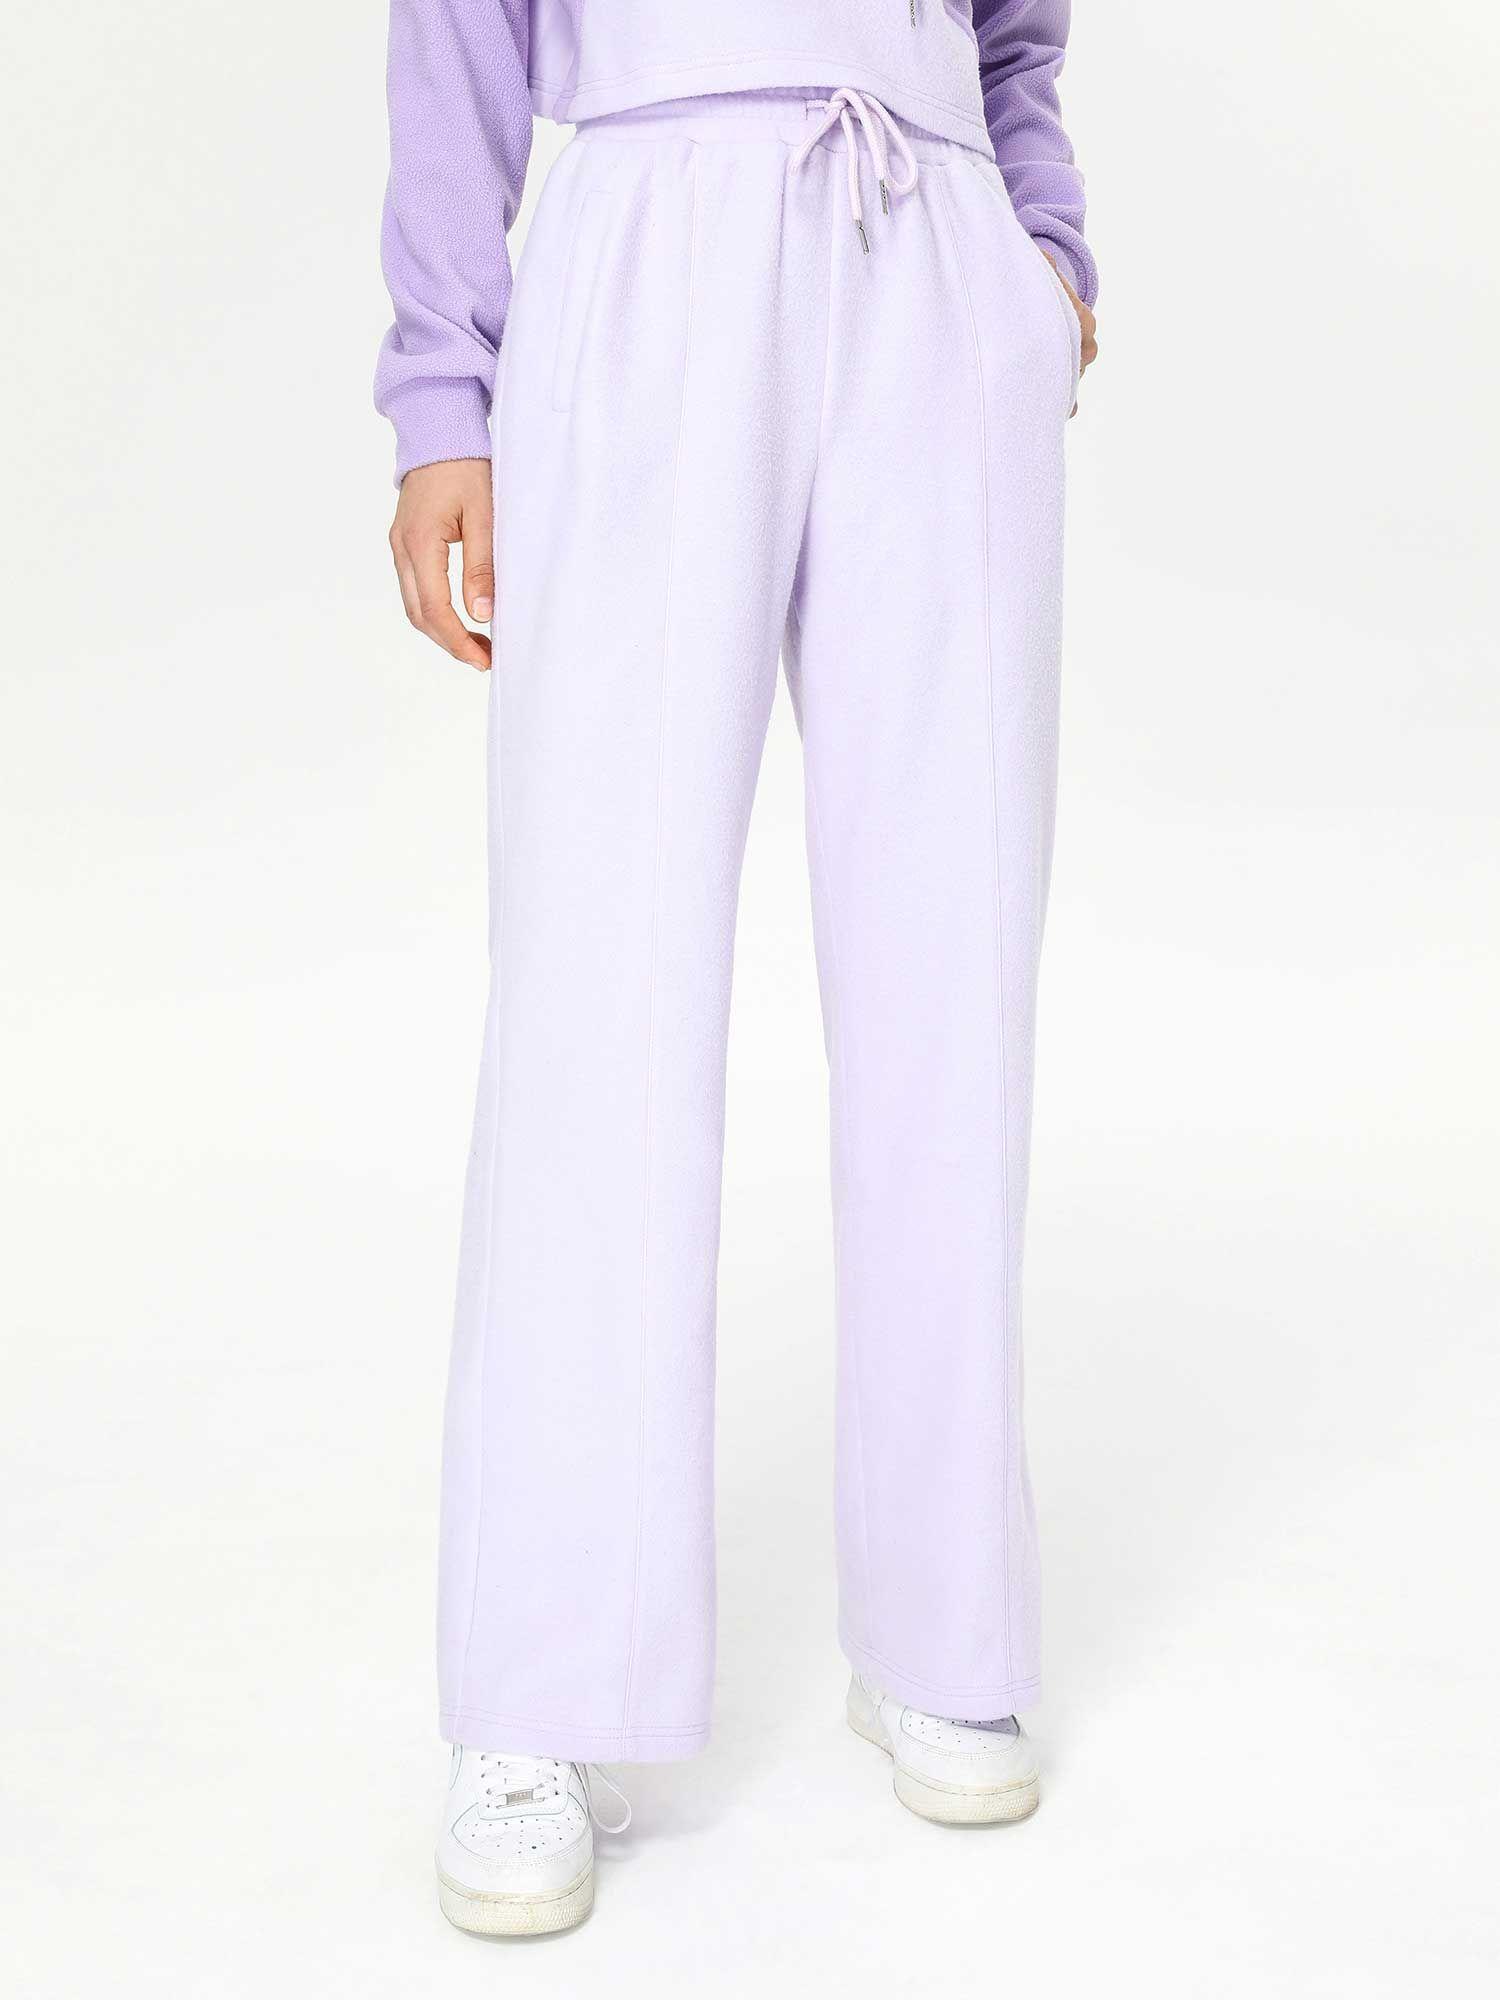 cozy patchy purple trousers